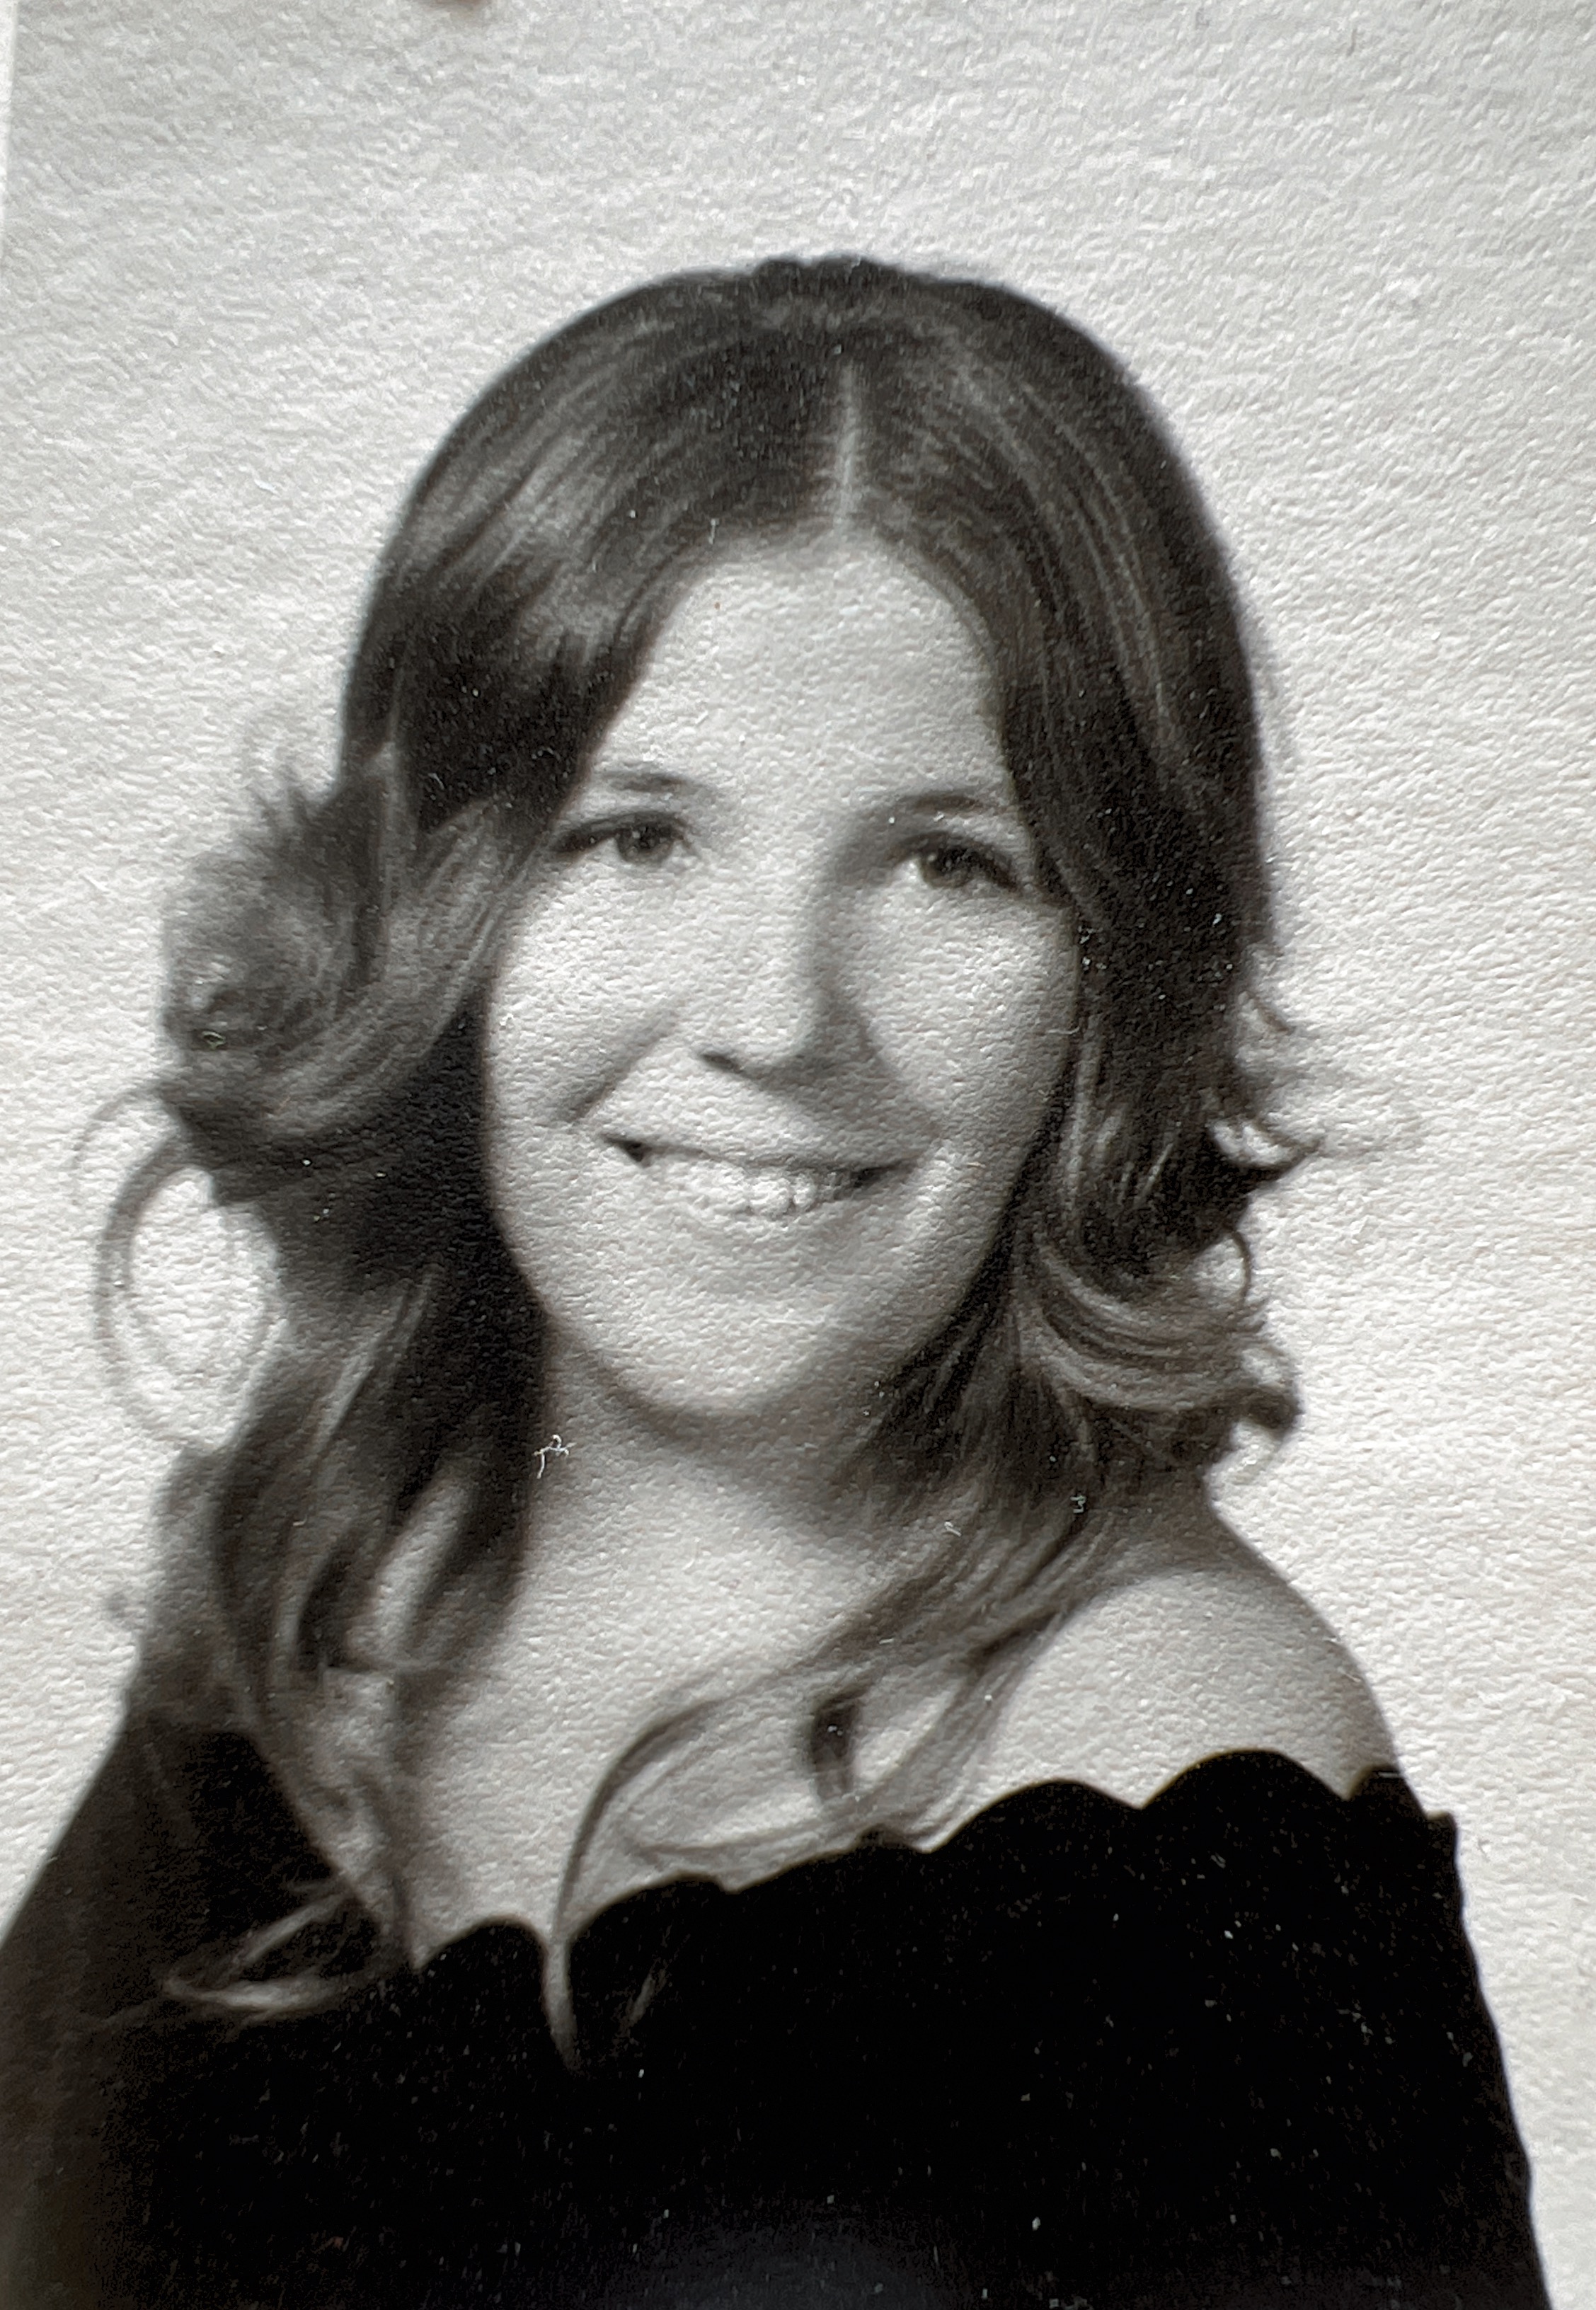 Janets Senior Picture. Taken late 1972, class of 1973